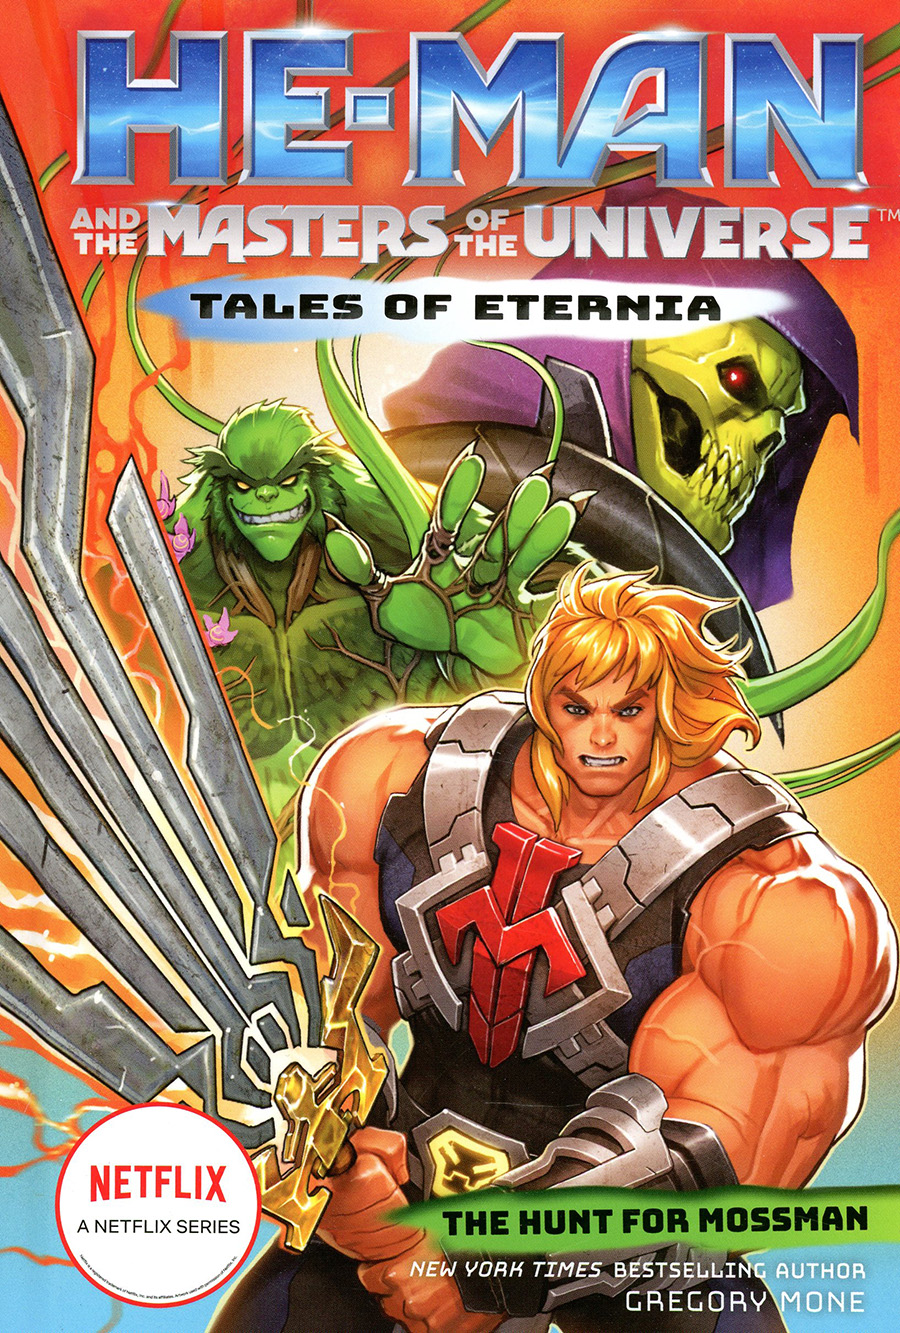 He-Man And The Masters Of The Universe Tales Of Eternia Vol 1 Hunt For Mossman Novel HC